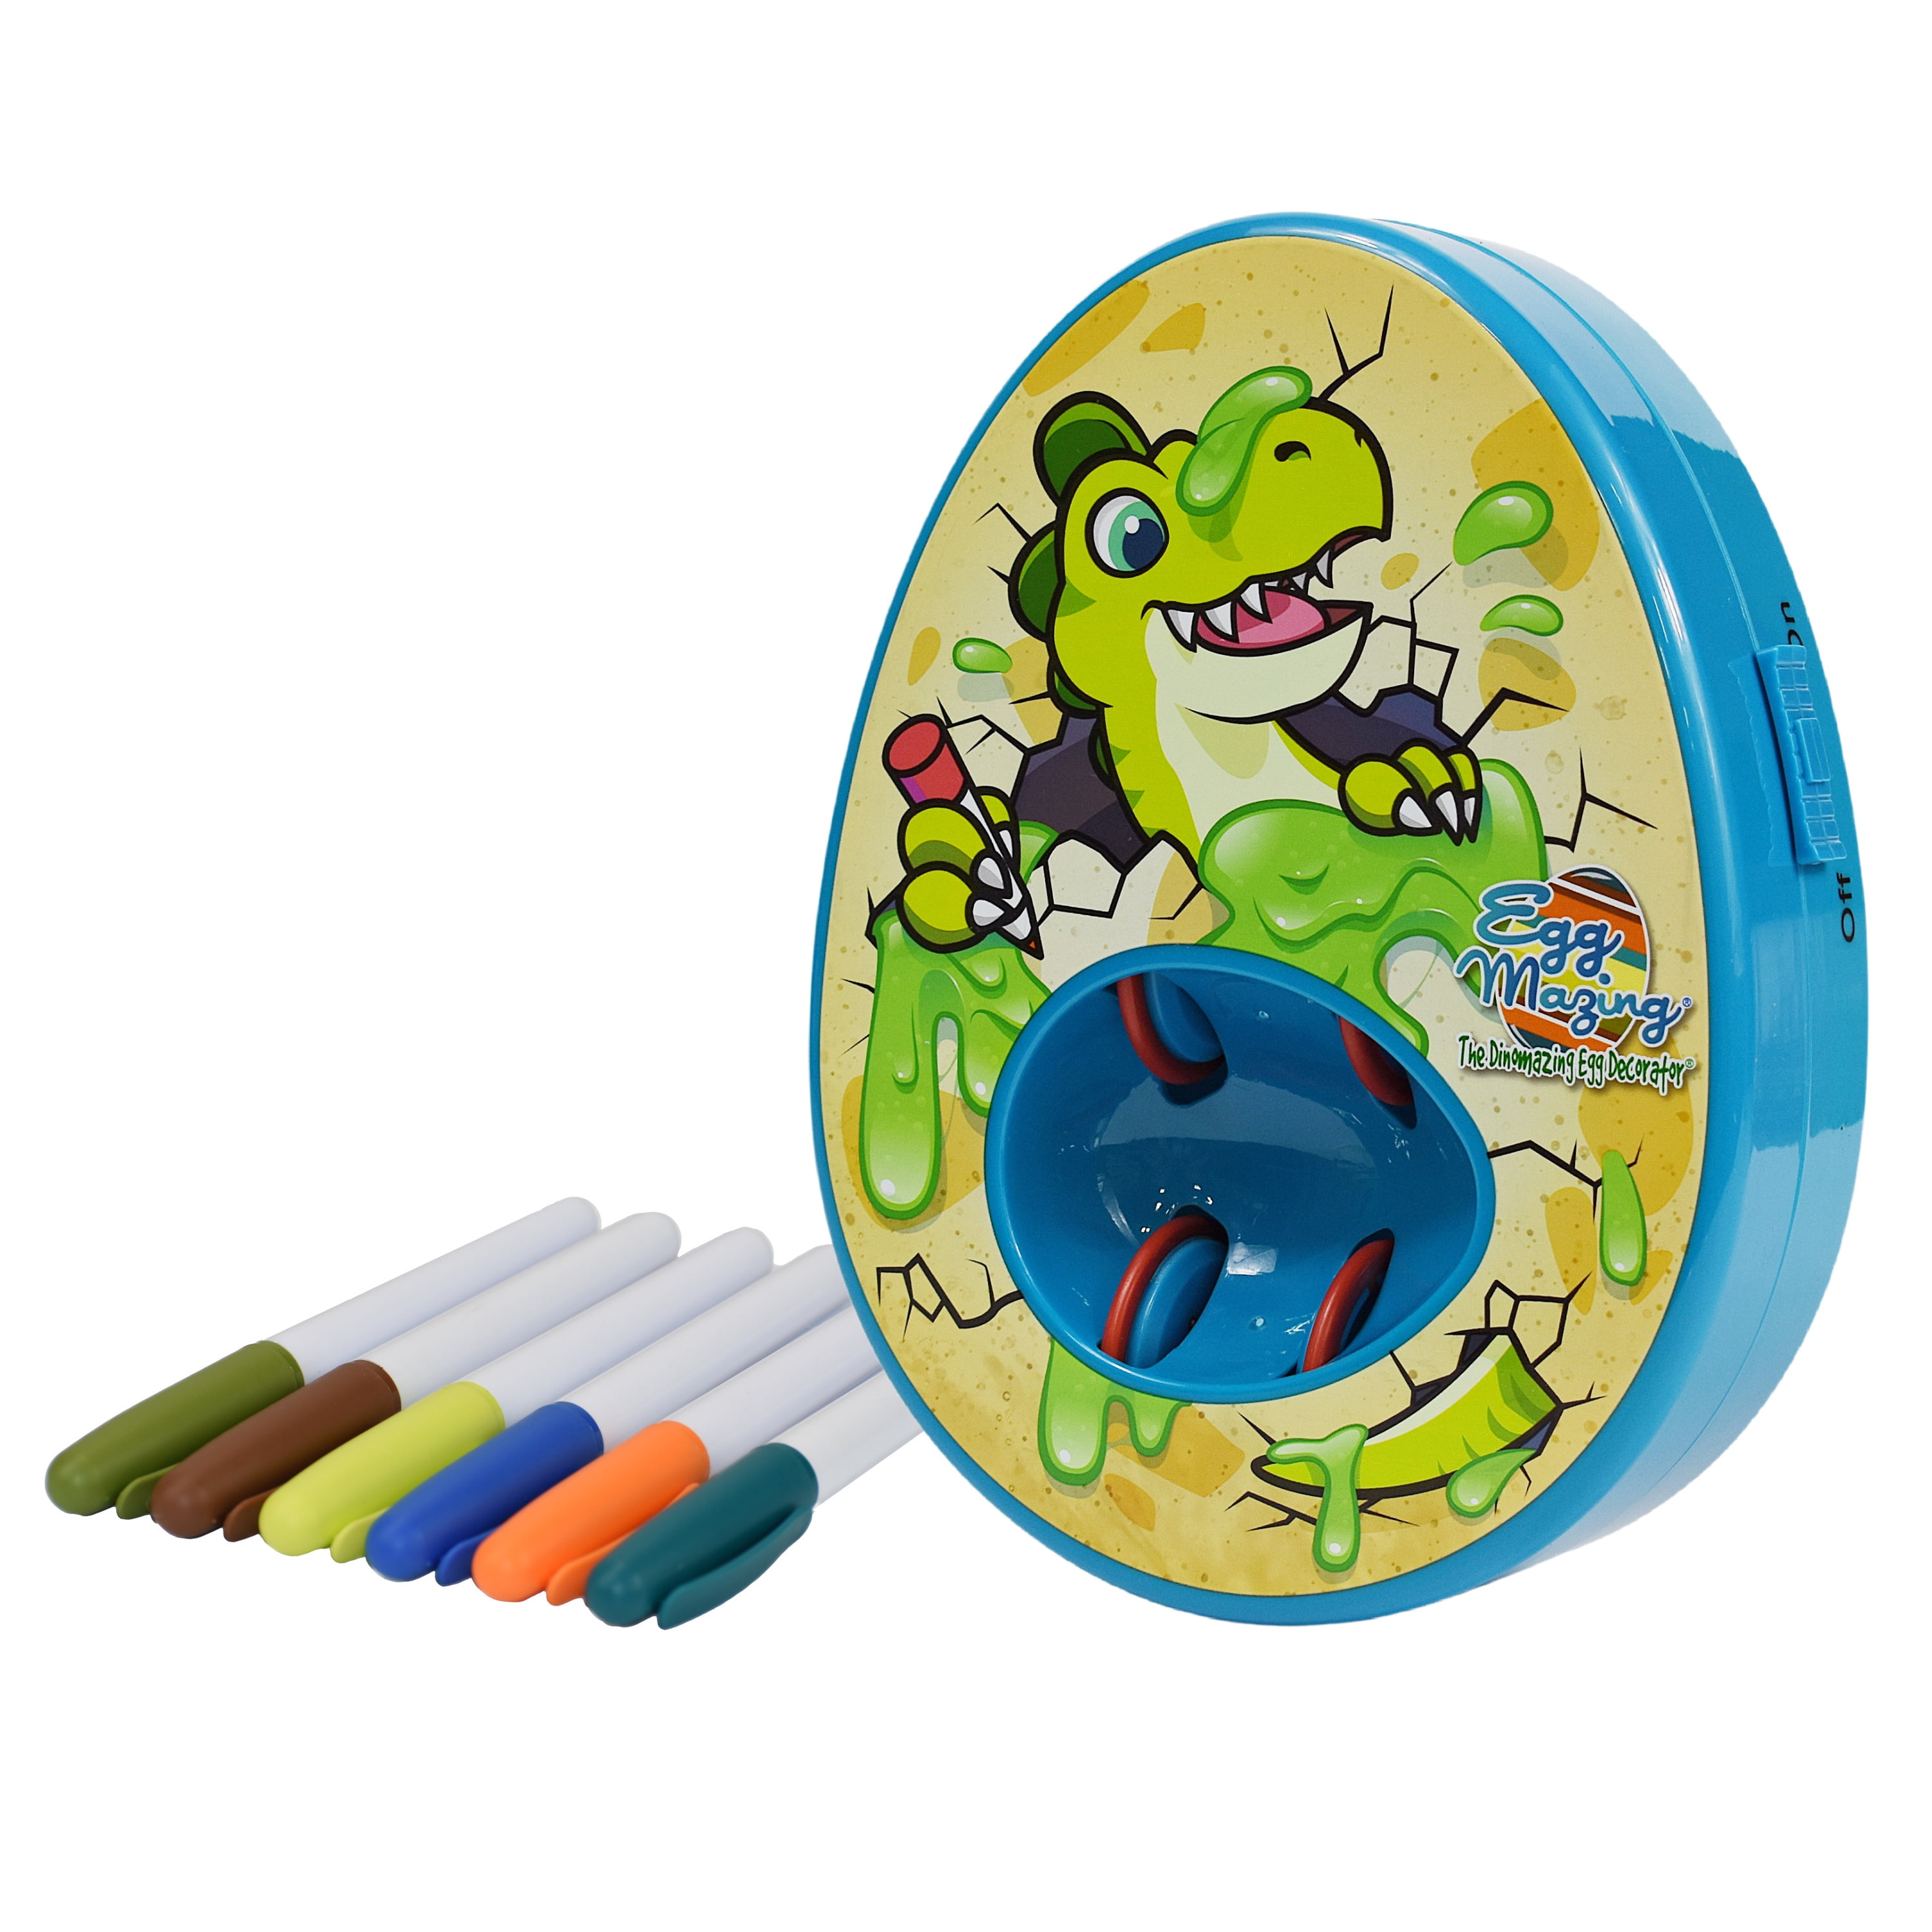 The DinoMazing Mini Egg and Easter Egg Decorator Kit, for ages 3 years and older